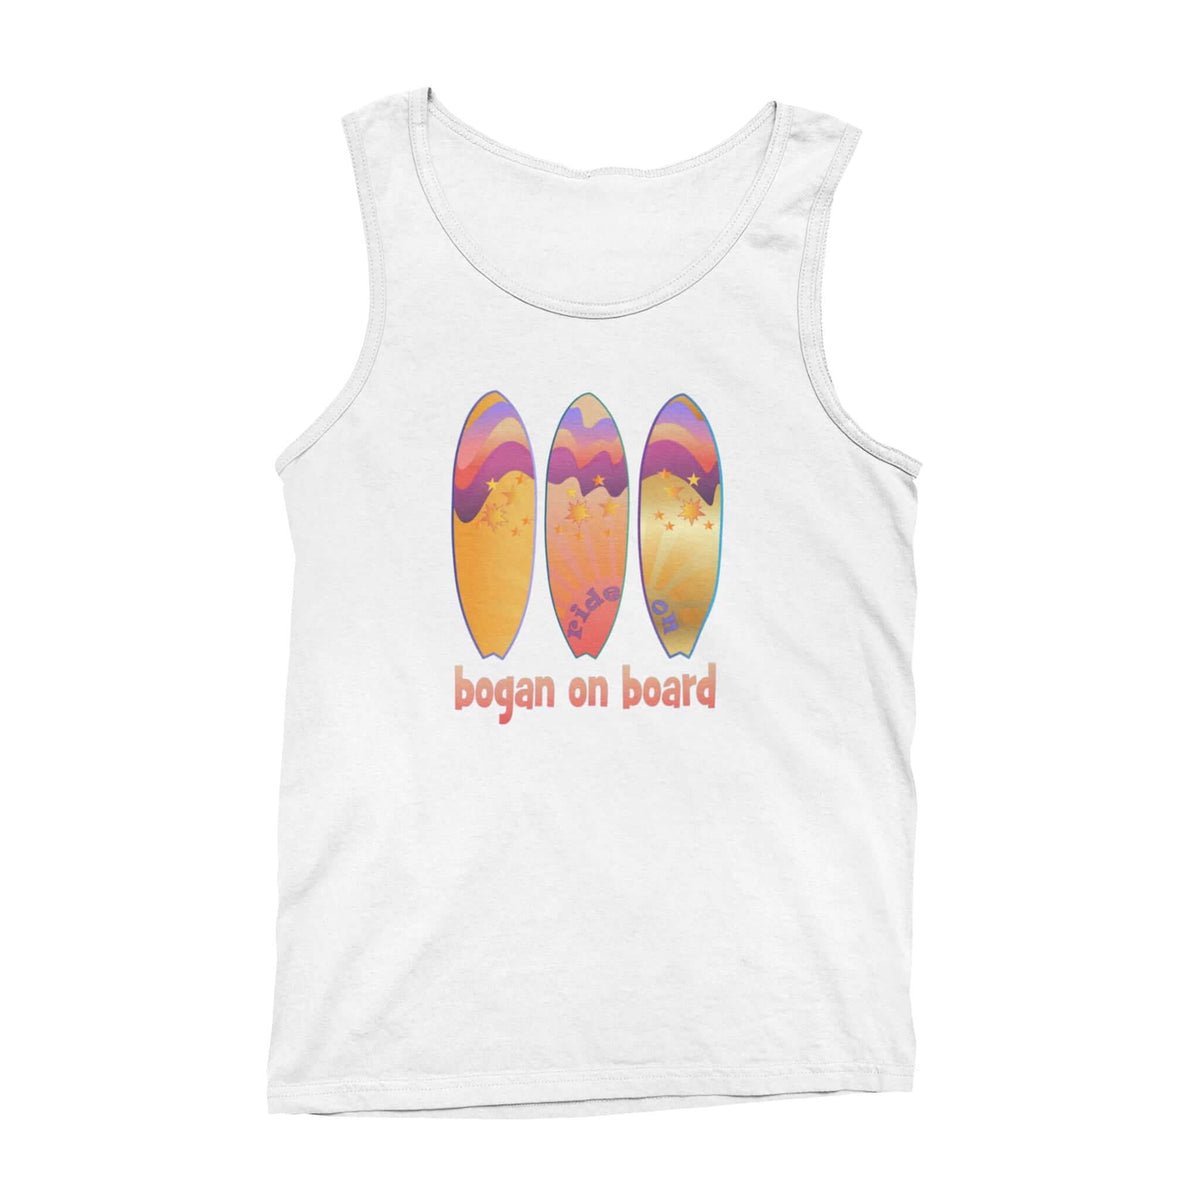 White tank top with Bogan on Board surf graphic design